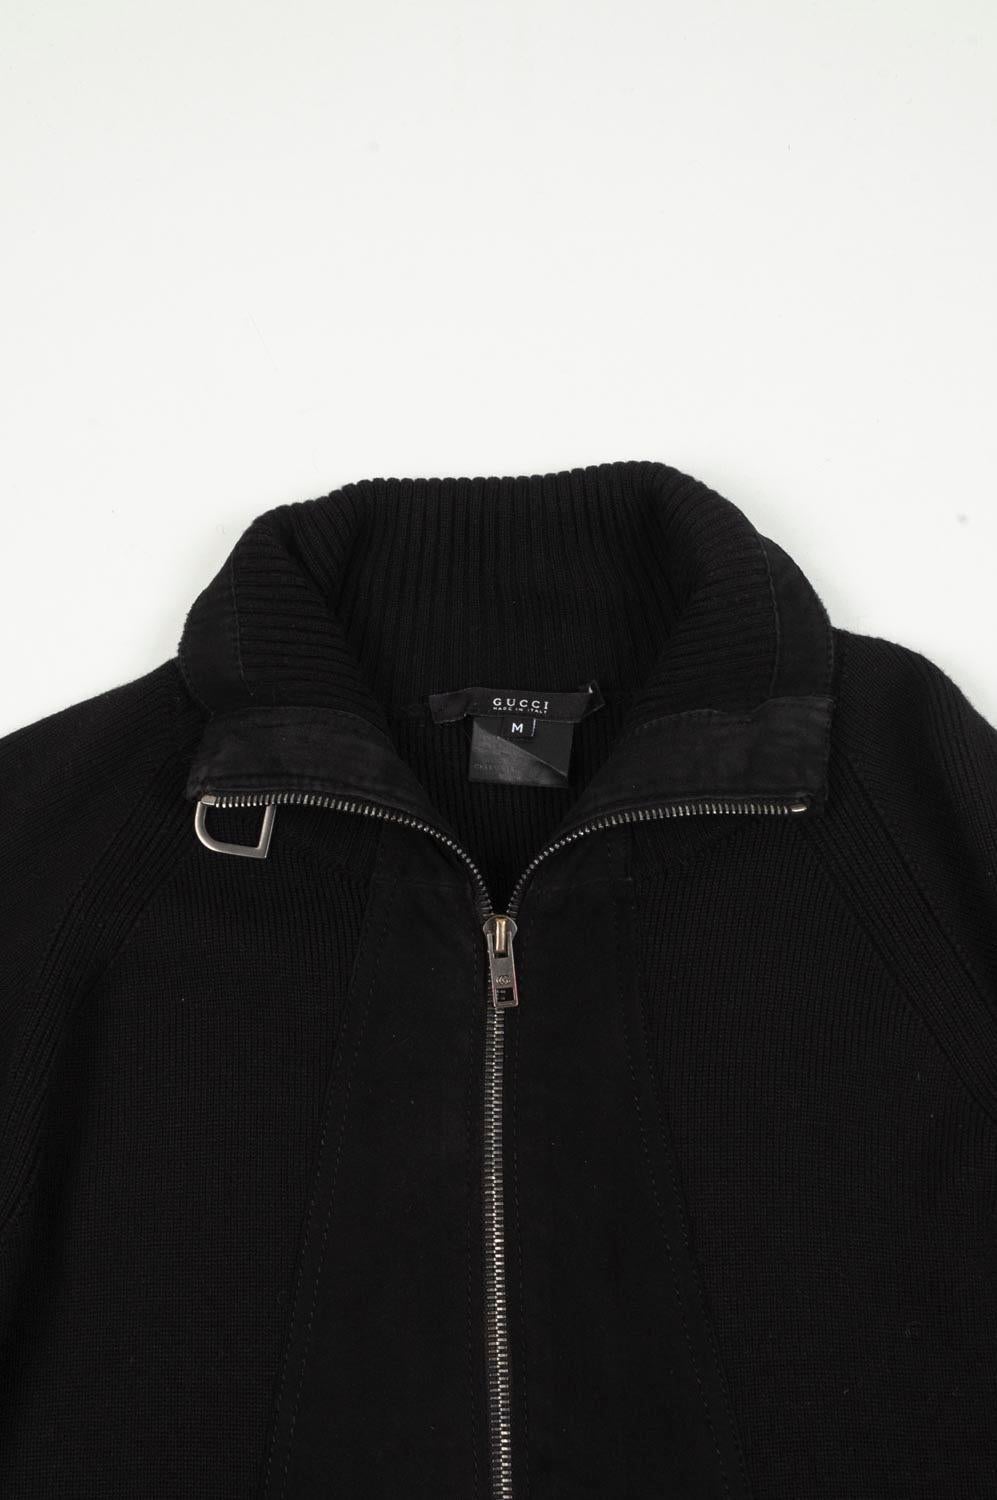 Check my other listings. Have many more designer clothes for sale. Open to any offers.
Item for sale is 100% genuine Gucci Wool/Suede Men Sweater, S525
Color: Black
Material: Wool and very front part leather
Tag size: M 
This jacket is great quality